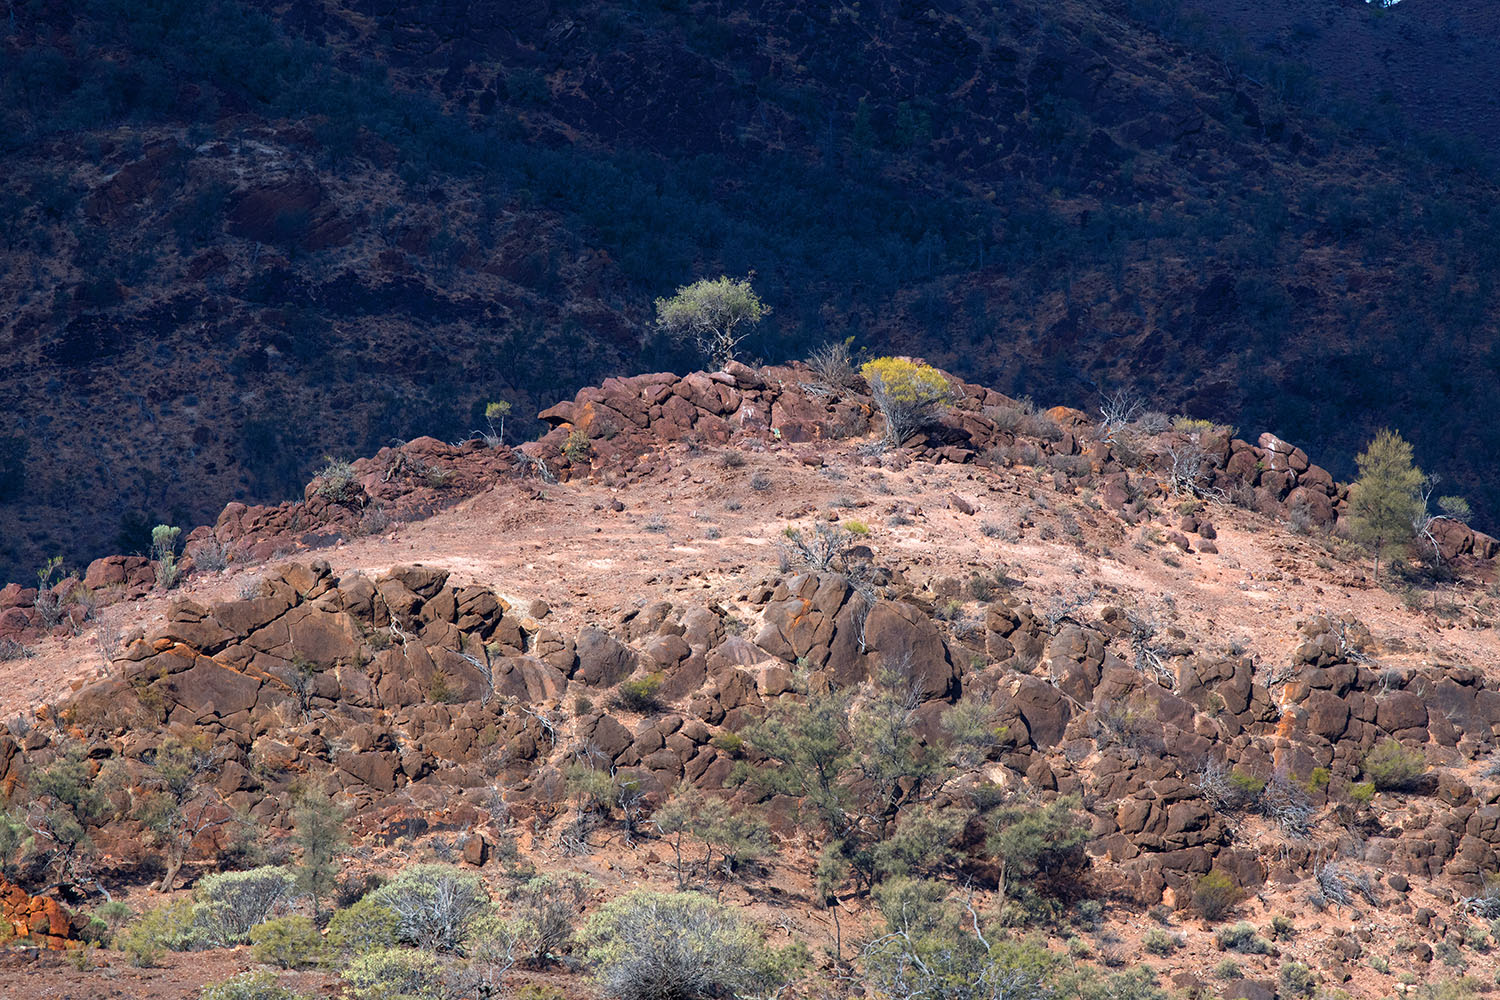 Rob Love, Photographer. Photo selection from Flinders Ranges, South Australia